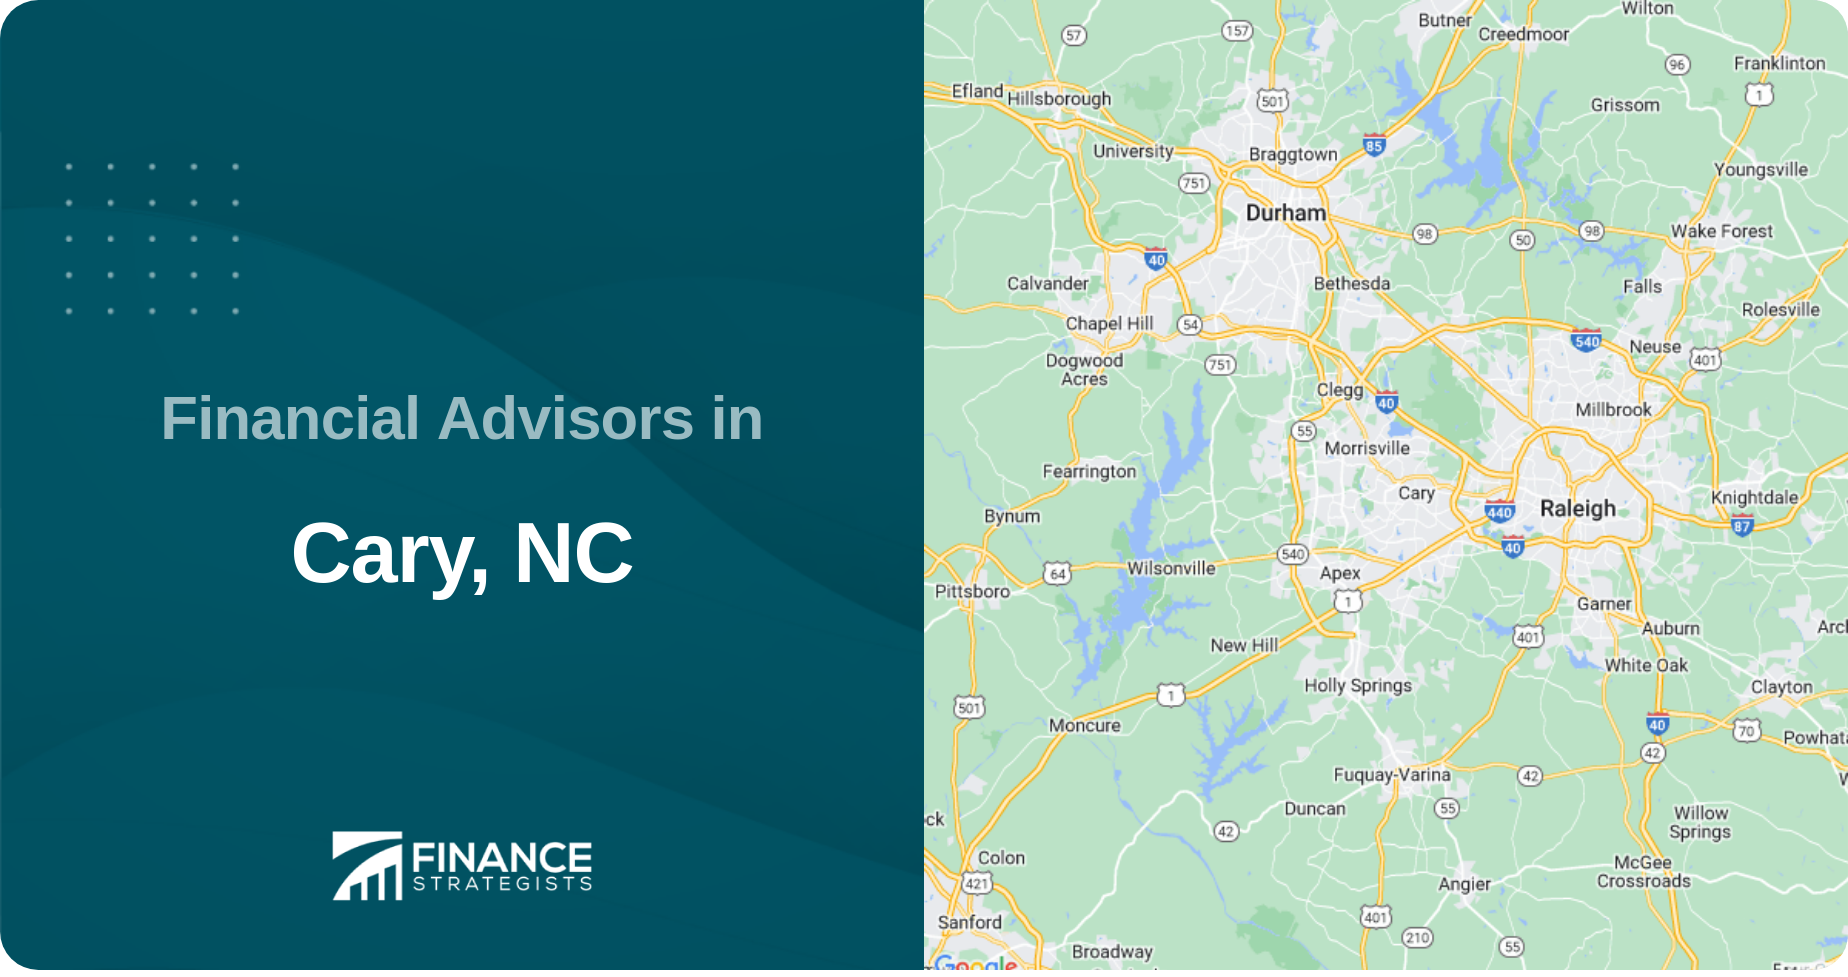 Financial Advisors in Cary, NC